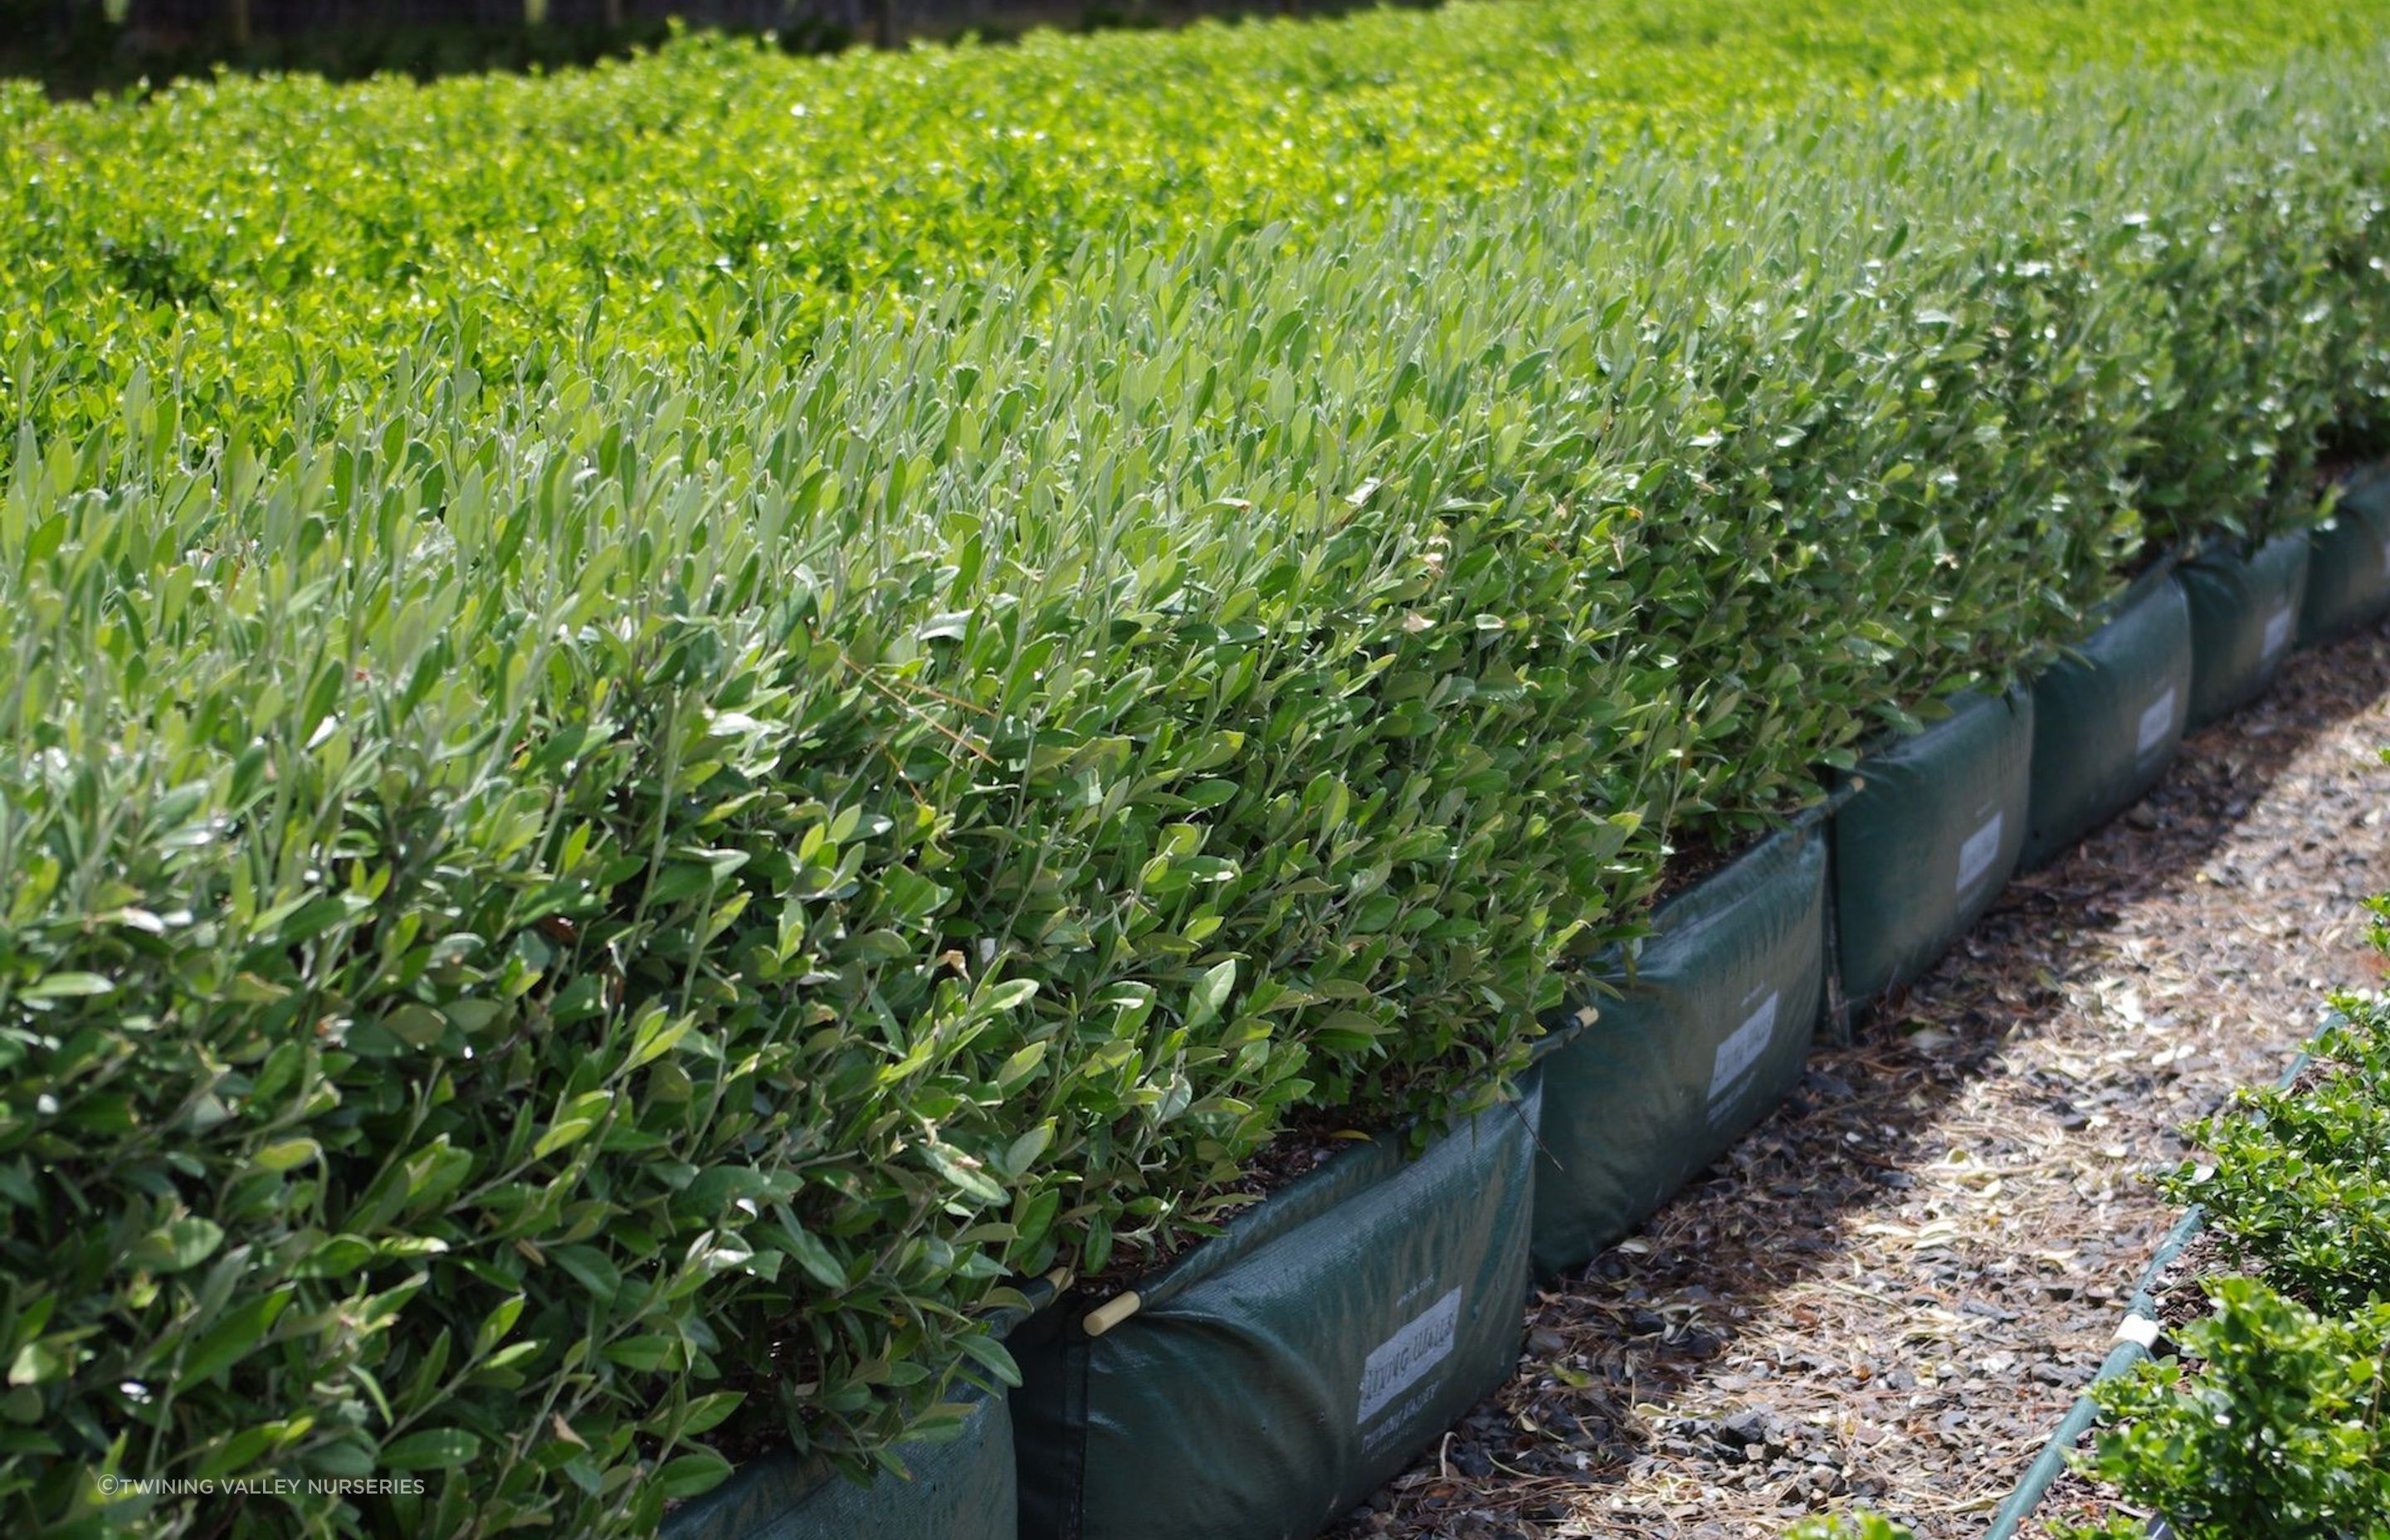 The Corokia 'Geenty's Green' is a compact hedge with olive green leaves that complement a wide variety of landscaping styles.